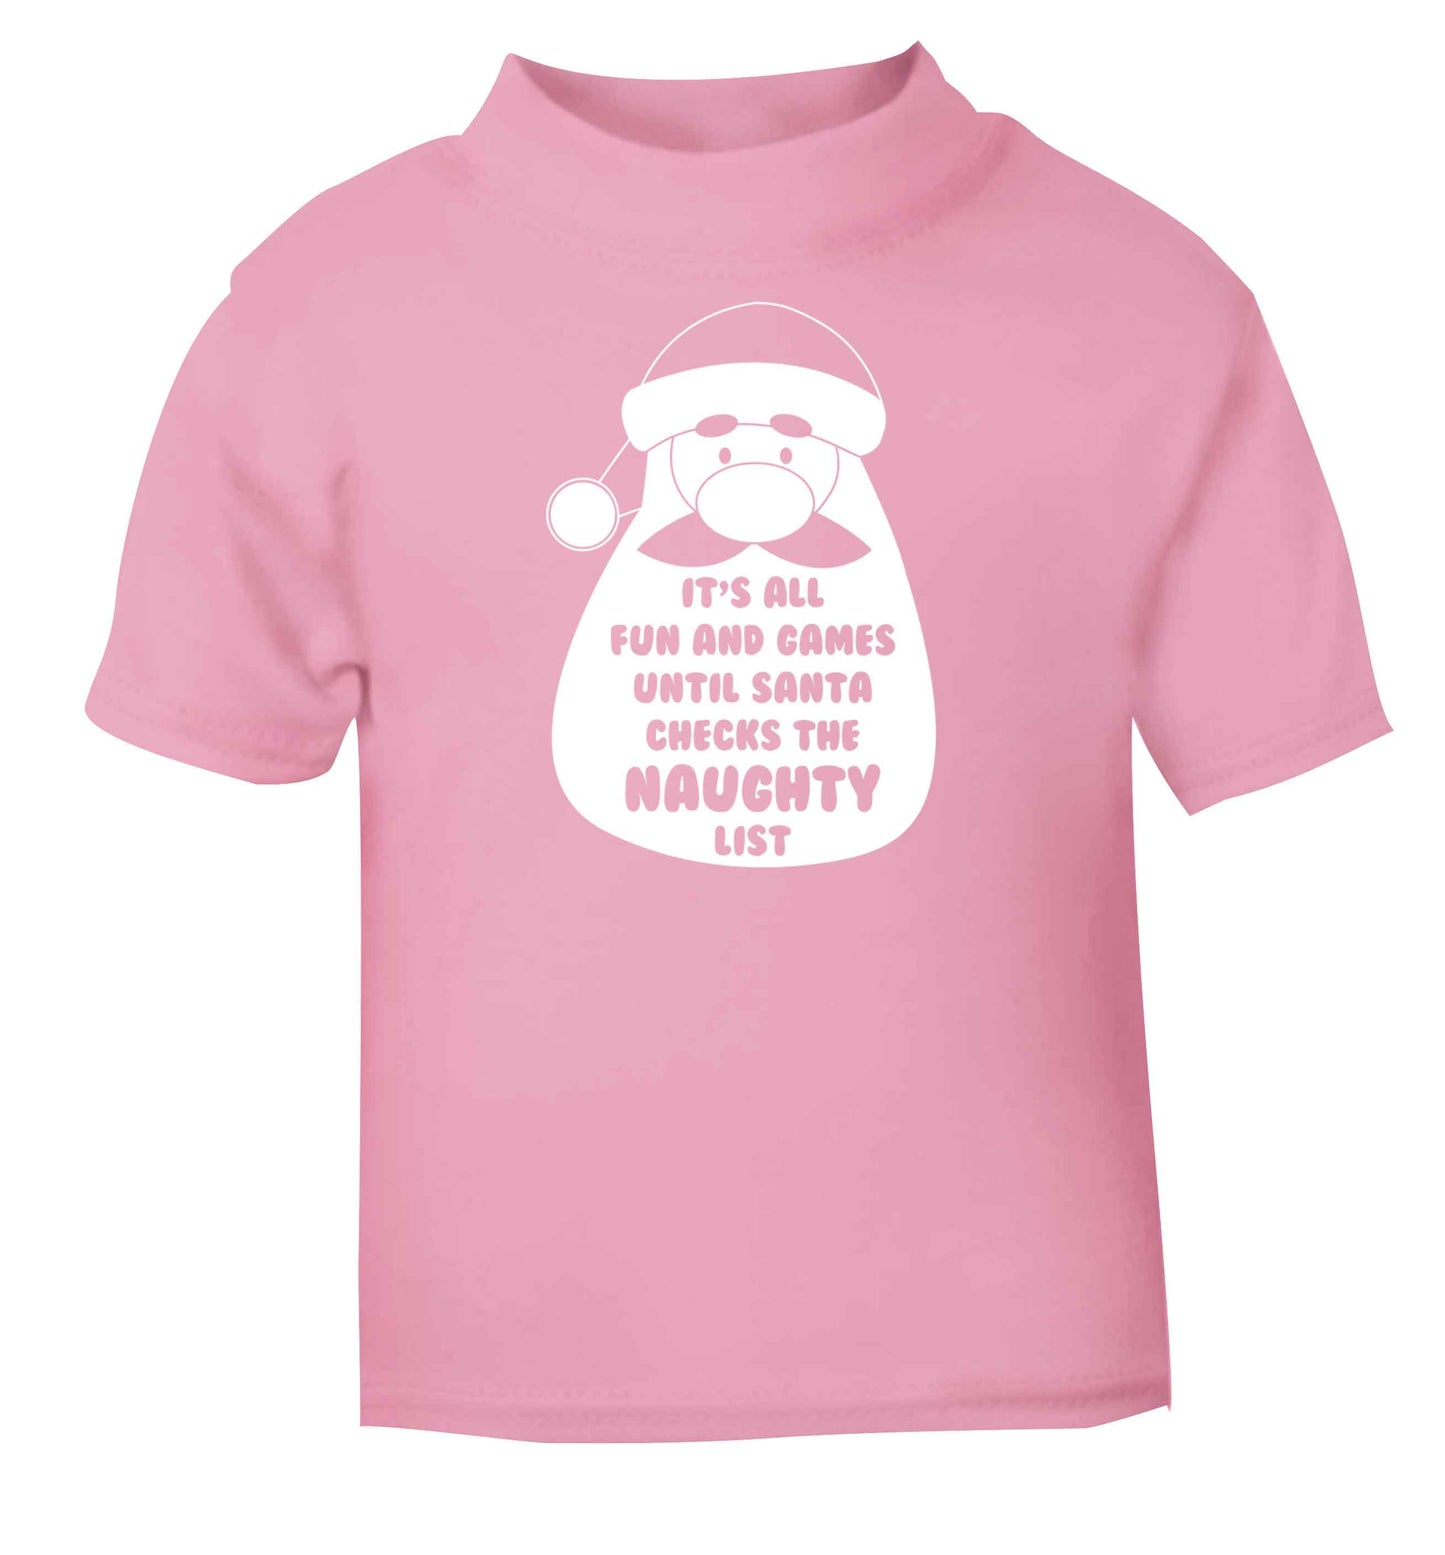 It's all fun and games until Santa checks the naughty list light pink baby toddler Tshirt 2 Years